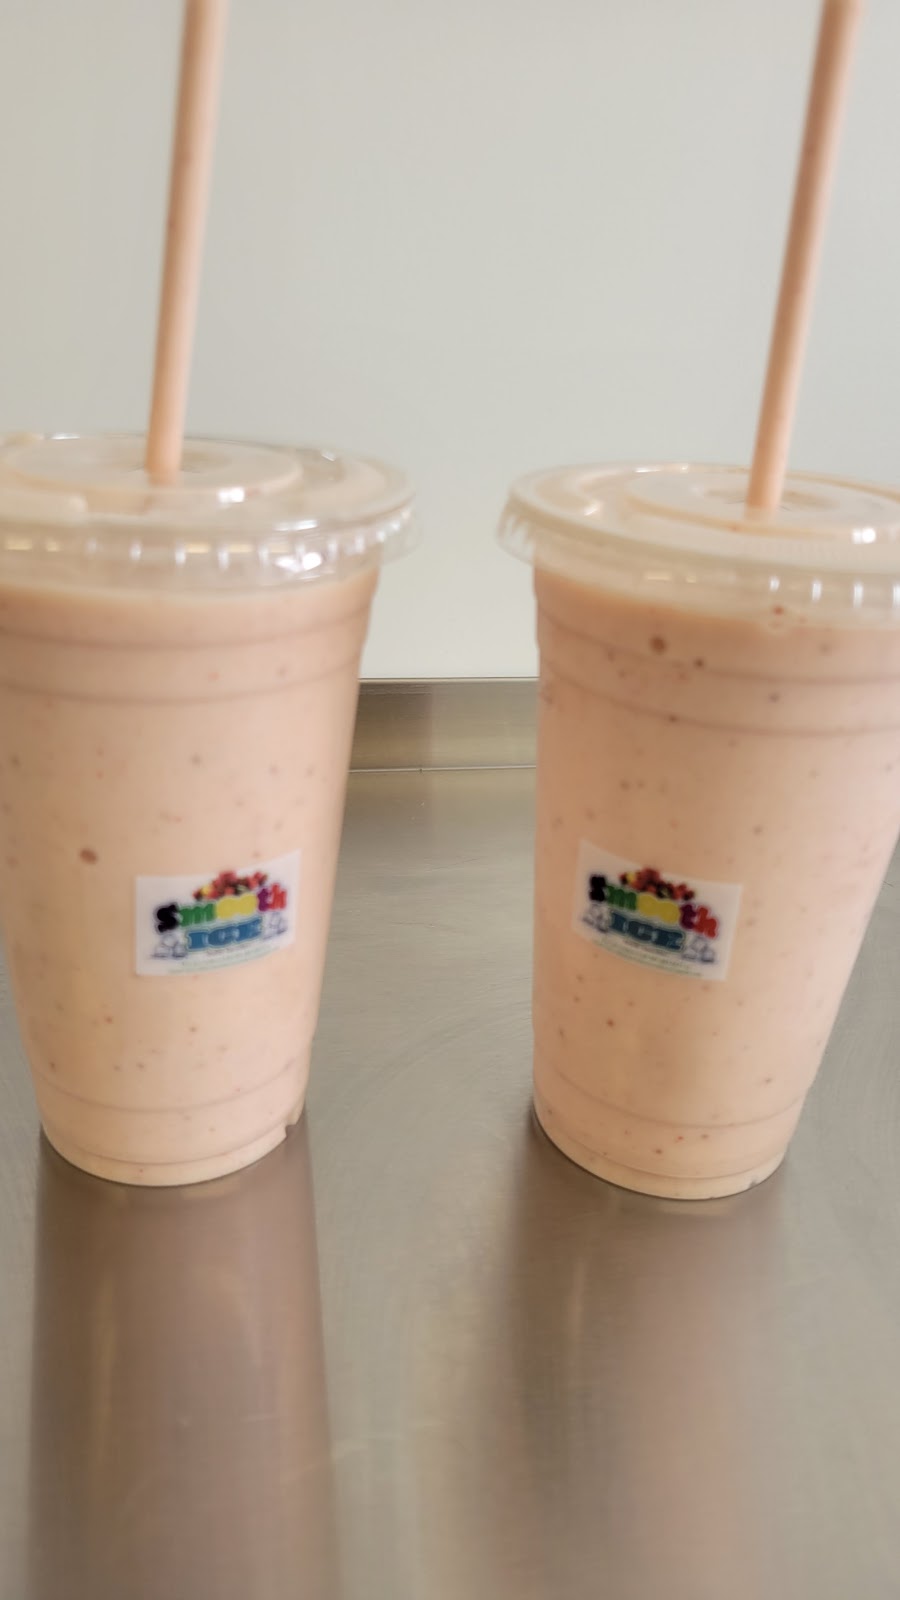 Smooth Ice Mobile Smoothies | 1445 Mendocino Creek Dr, Patterson, CA 95363, USA | Phone: (209) 484-0613